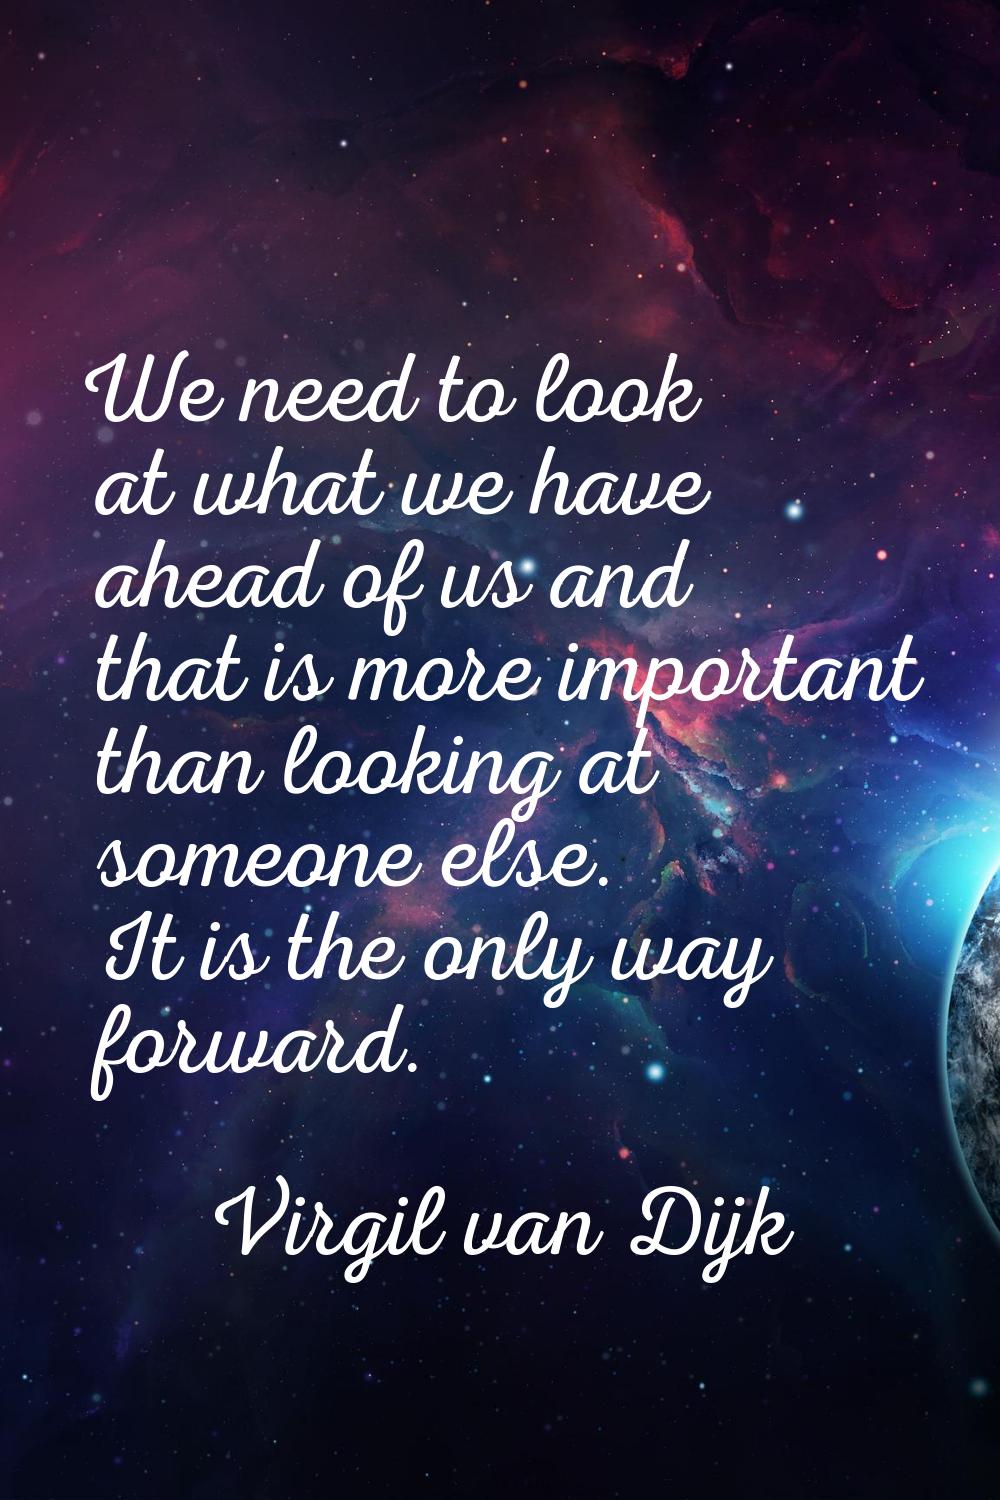 We need to look at what we have ahead of us and that is more important than looking at someone else